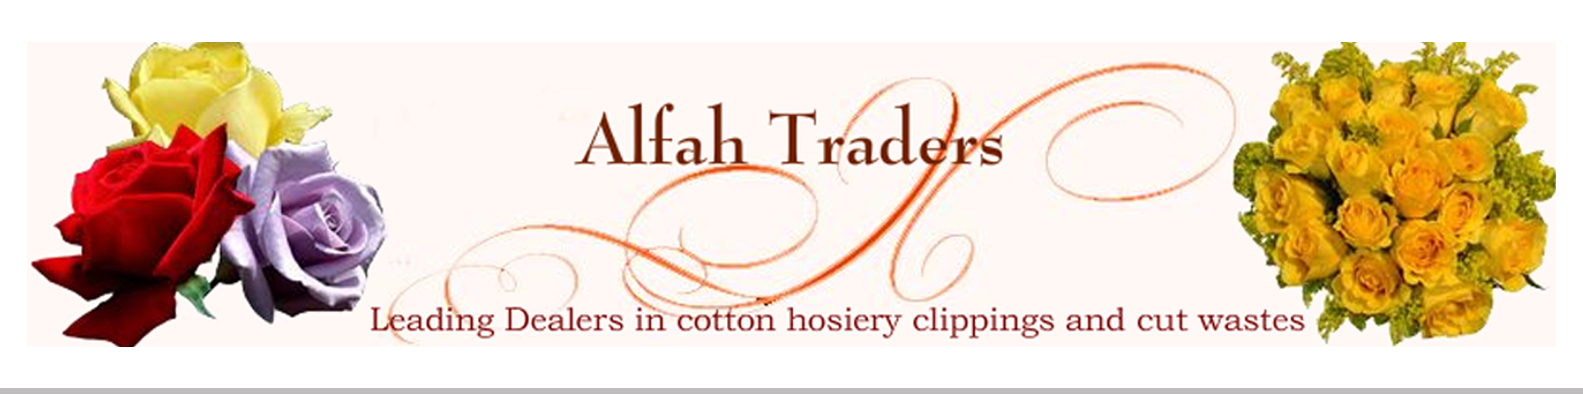 alfahtraders, , alfahtrader, Leading Dealers in